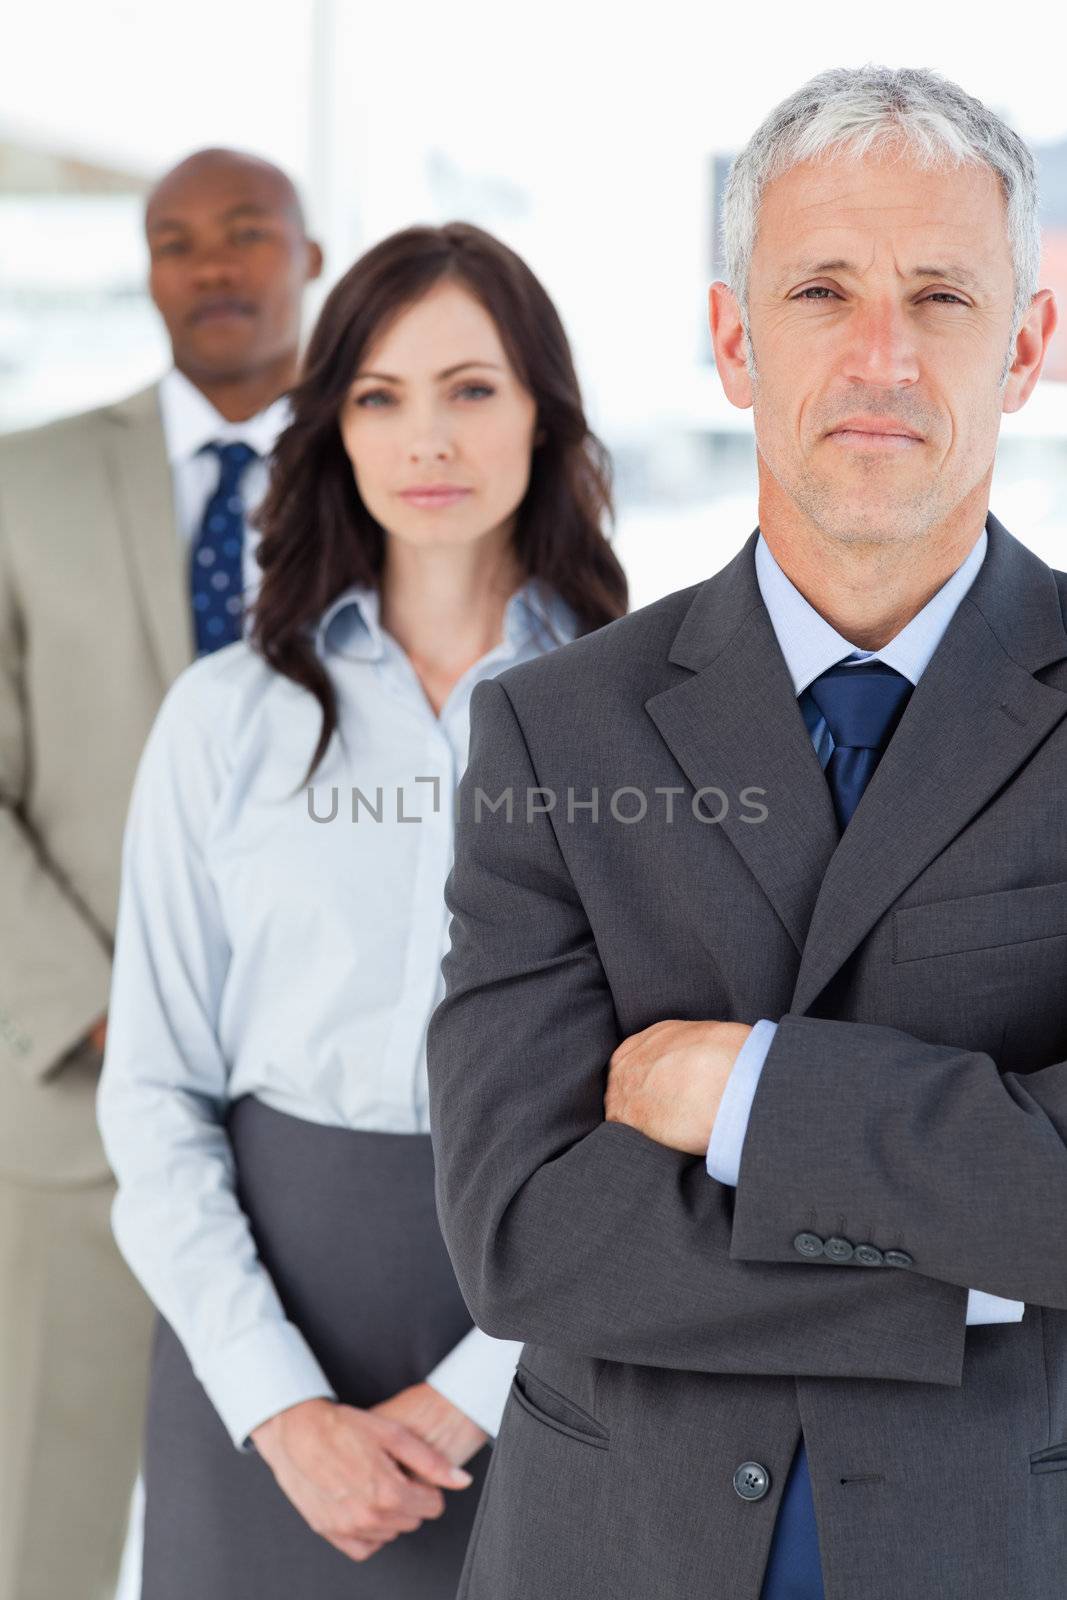 Mature manager crossing his arms seriously in front of two membe by Wavebreakmedia